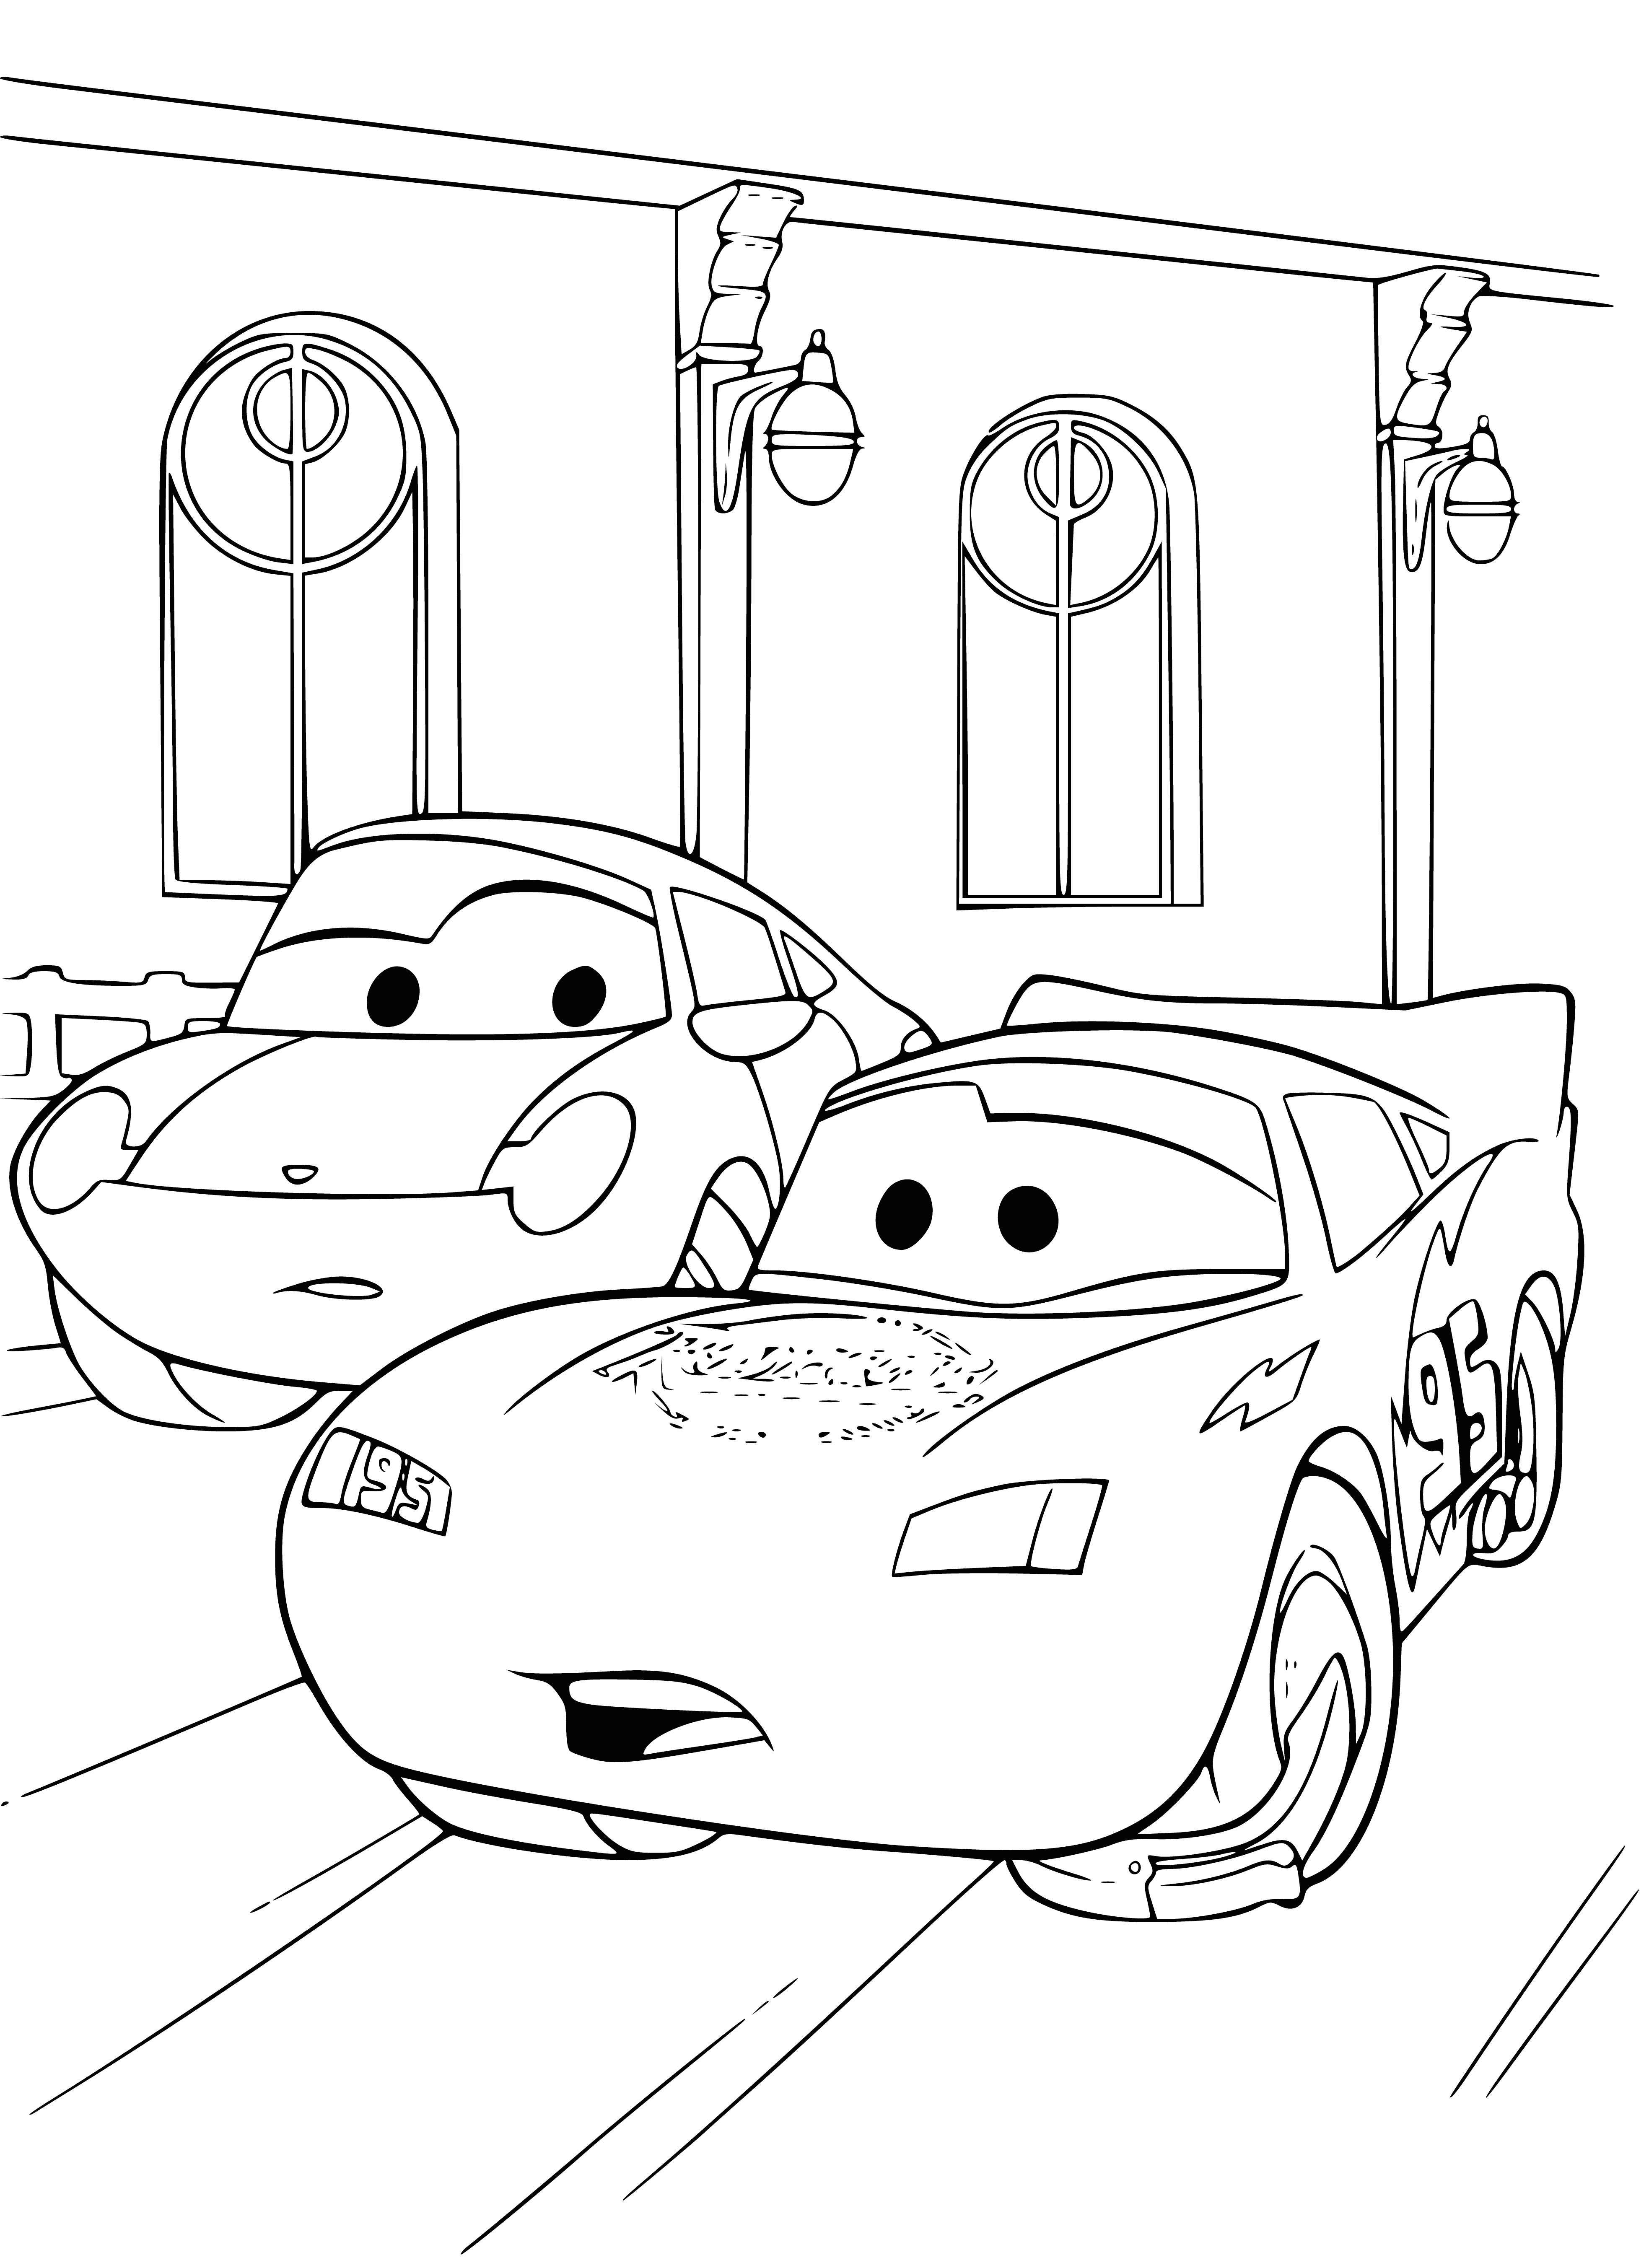 coloring page: Two cars: one gray w/ blue stripes, one green; gray w/ hood up; background of blue sky.